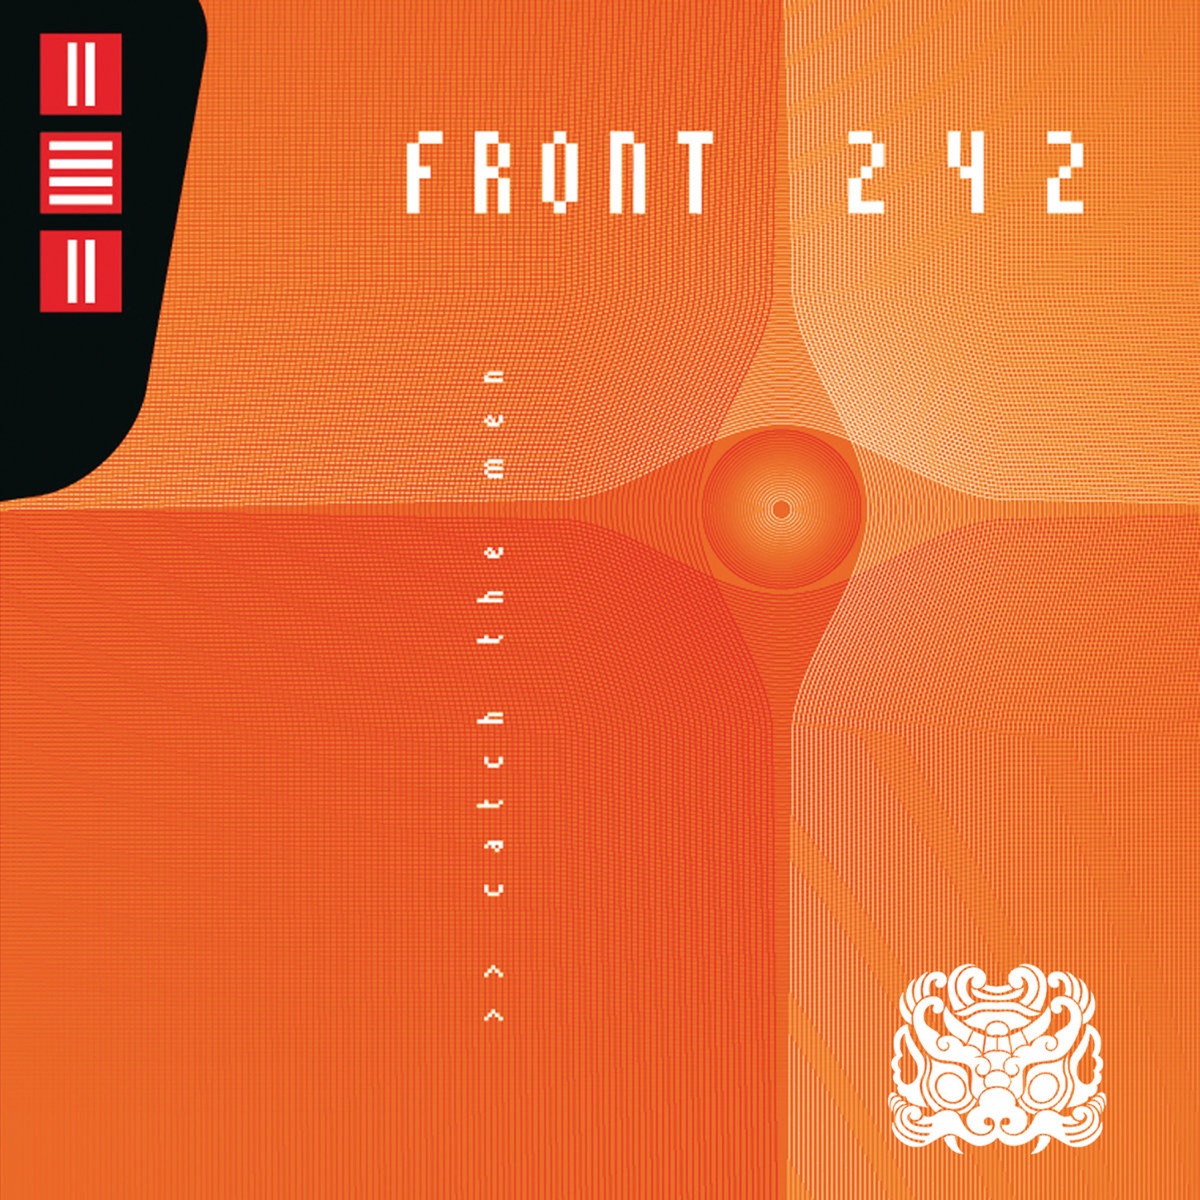 Front By Front - Album by Front 242 - Apple Music